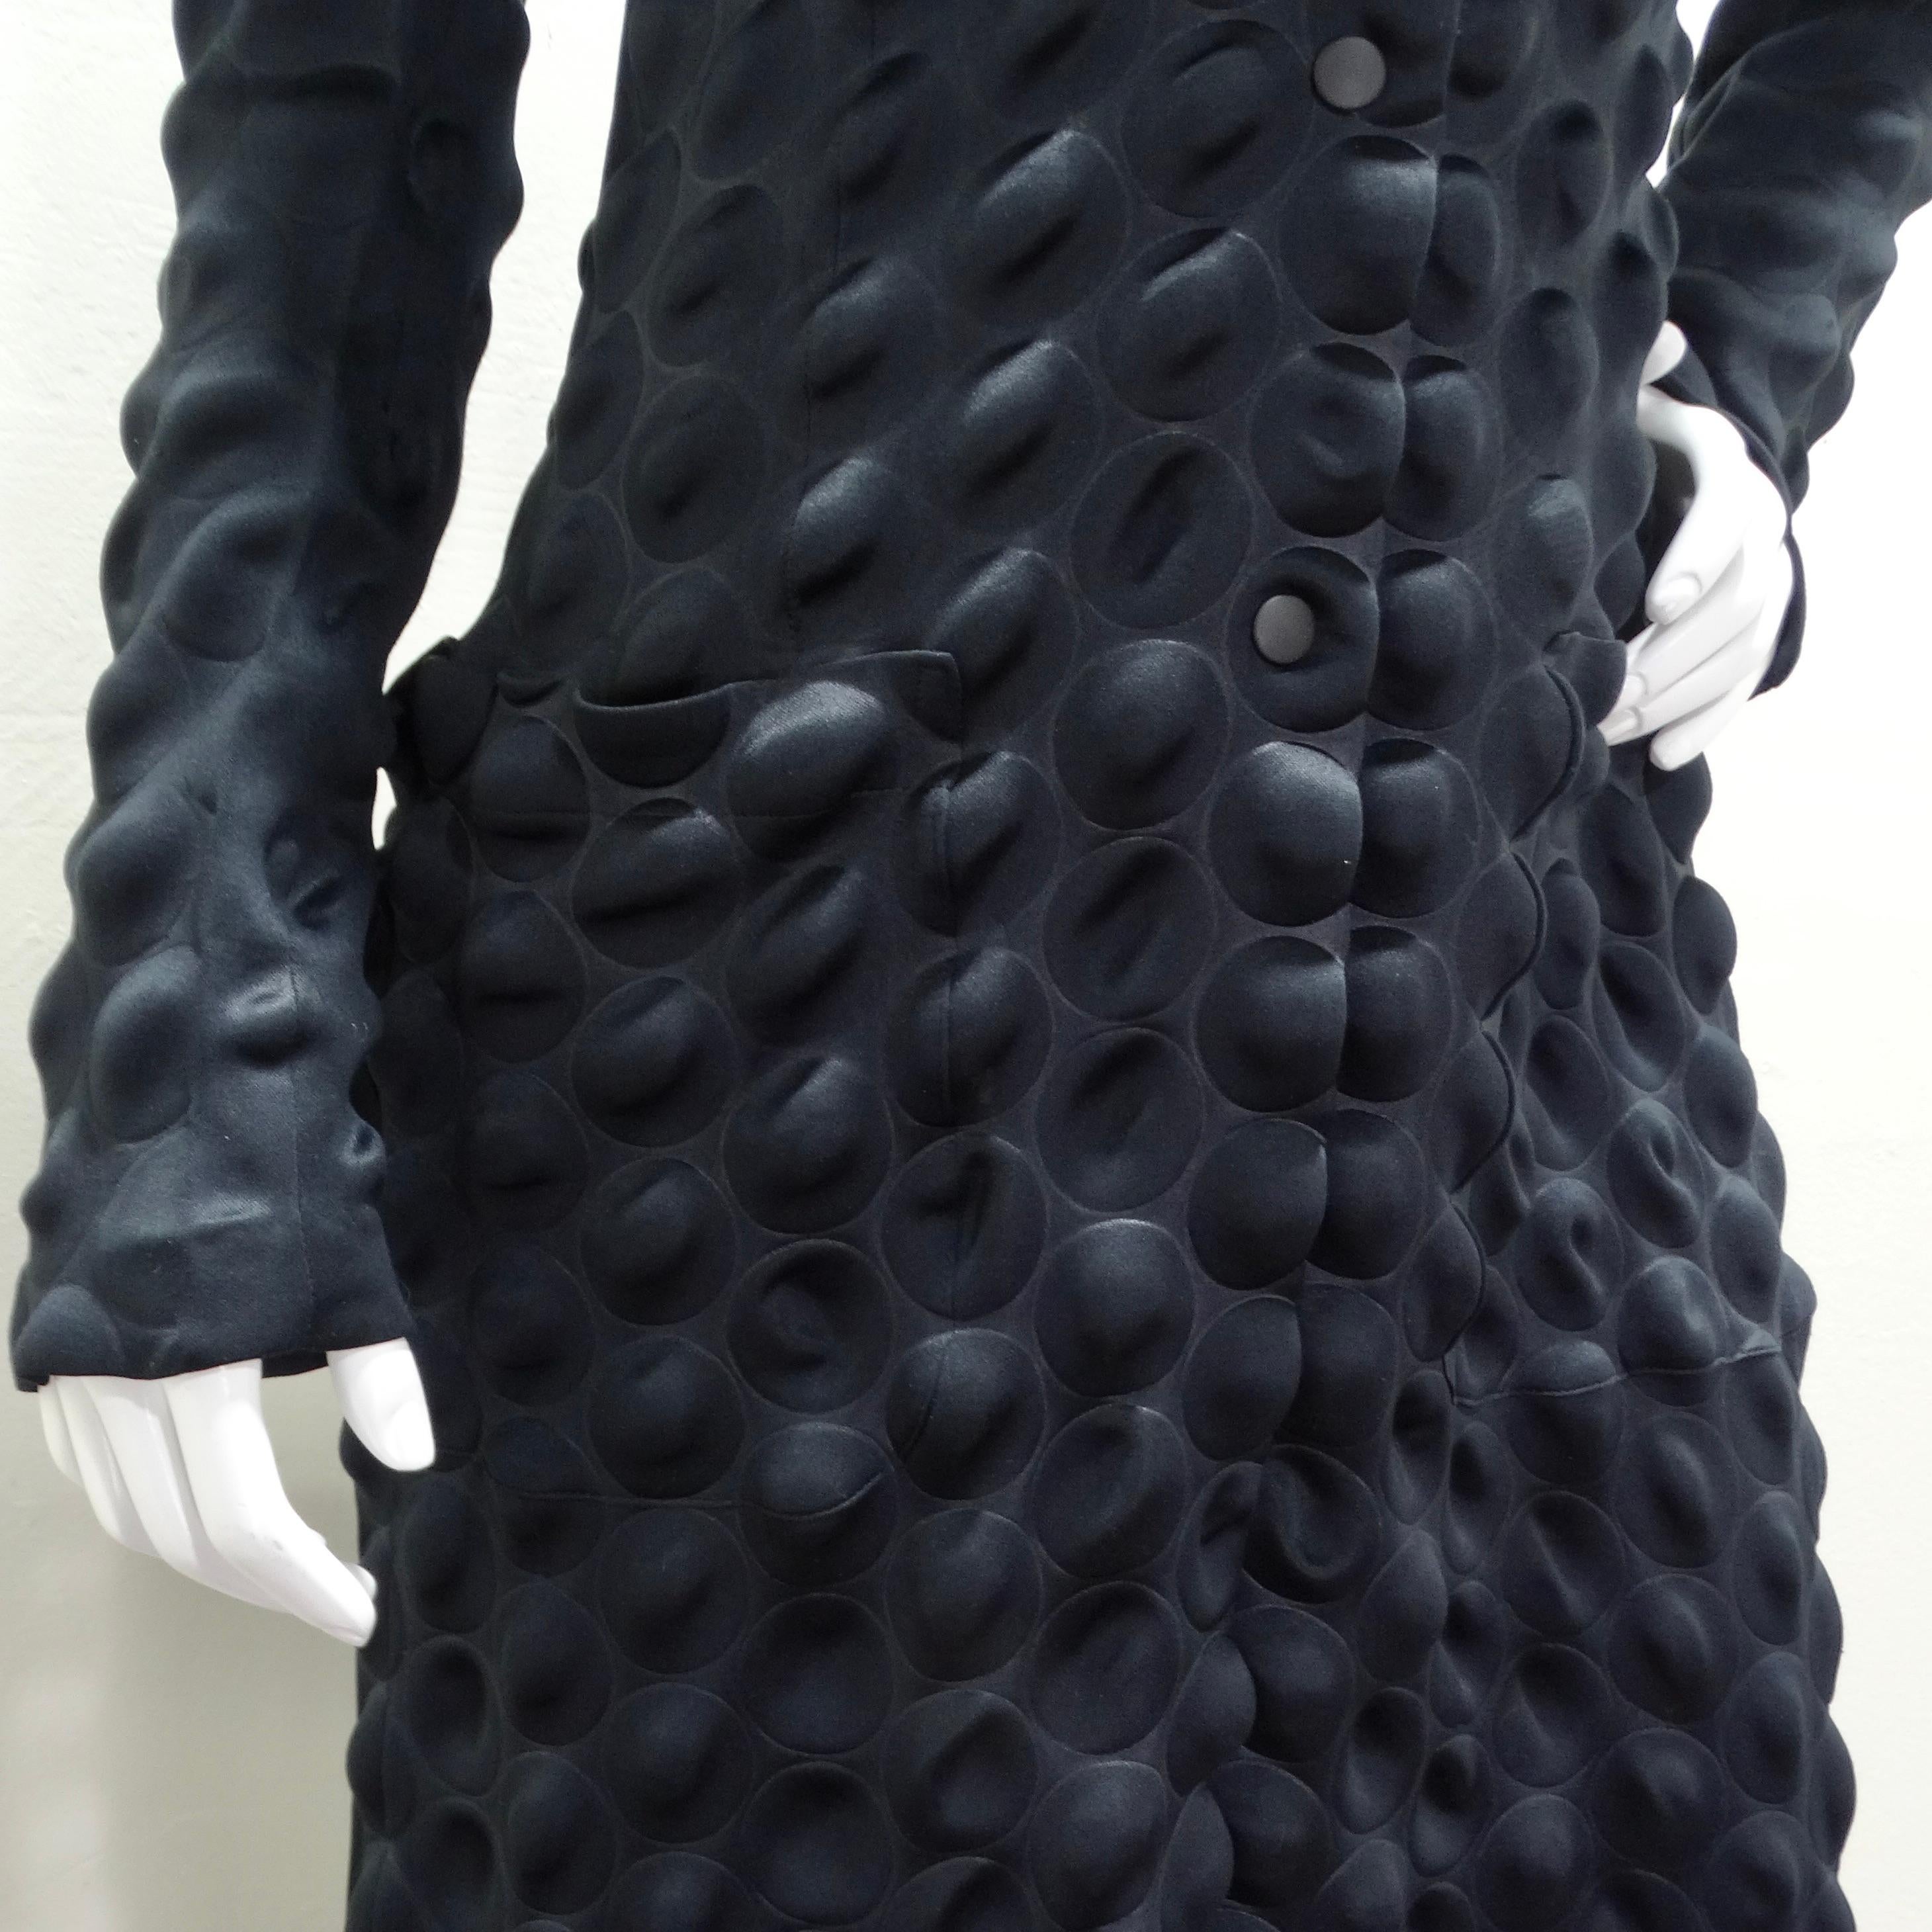 Issey Miyake Black Bubble Coat In Good Condition For Sale In Scottsdale, AZ